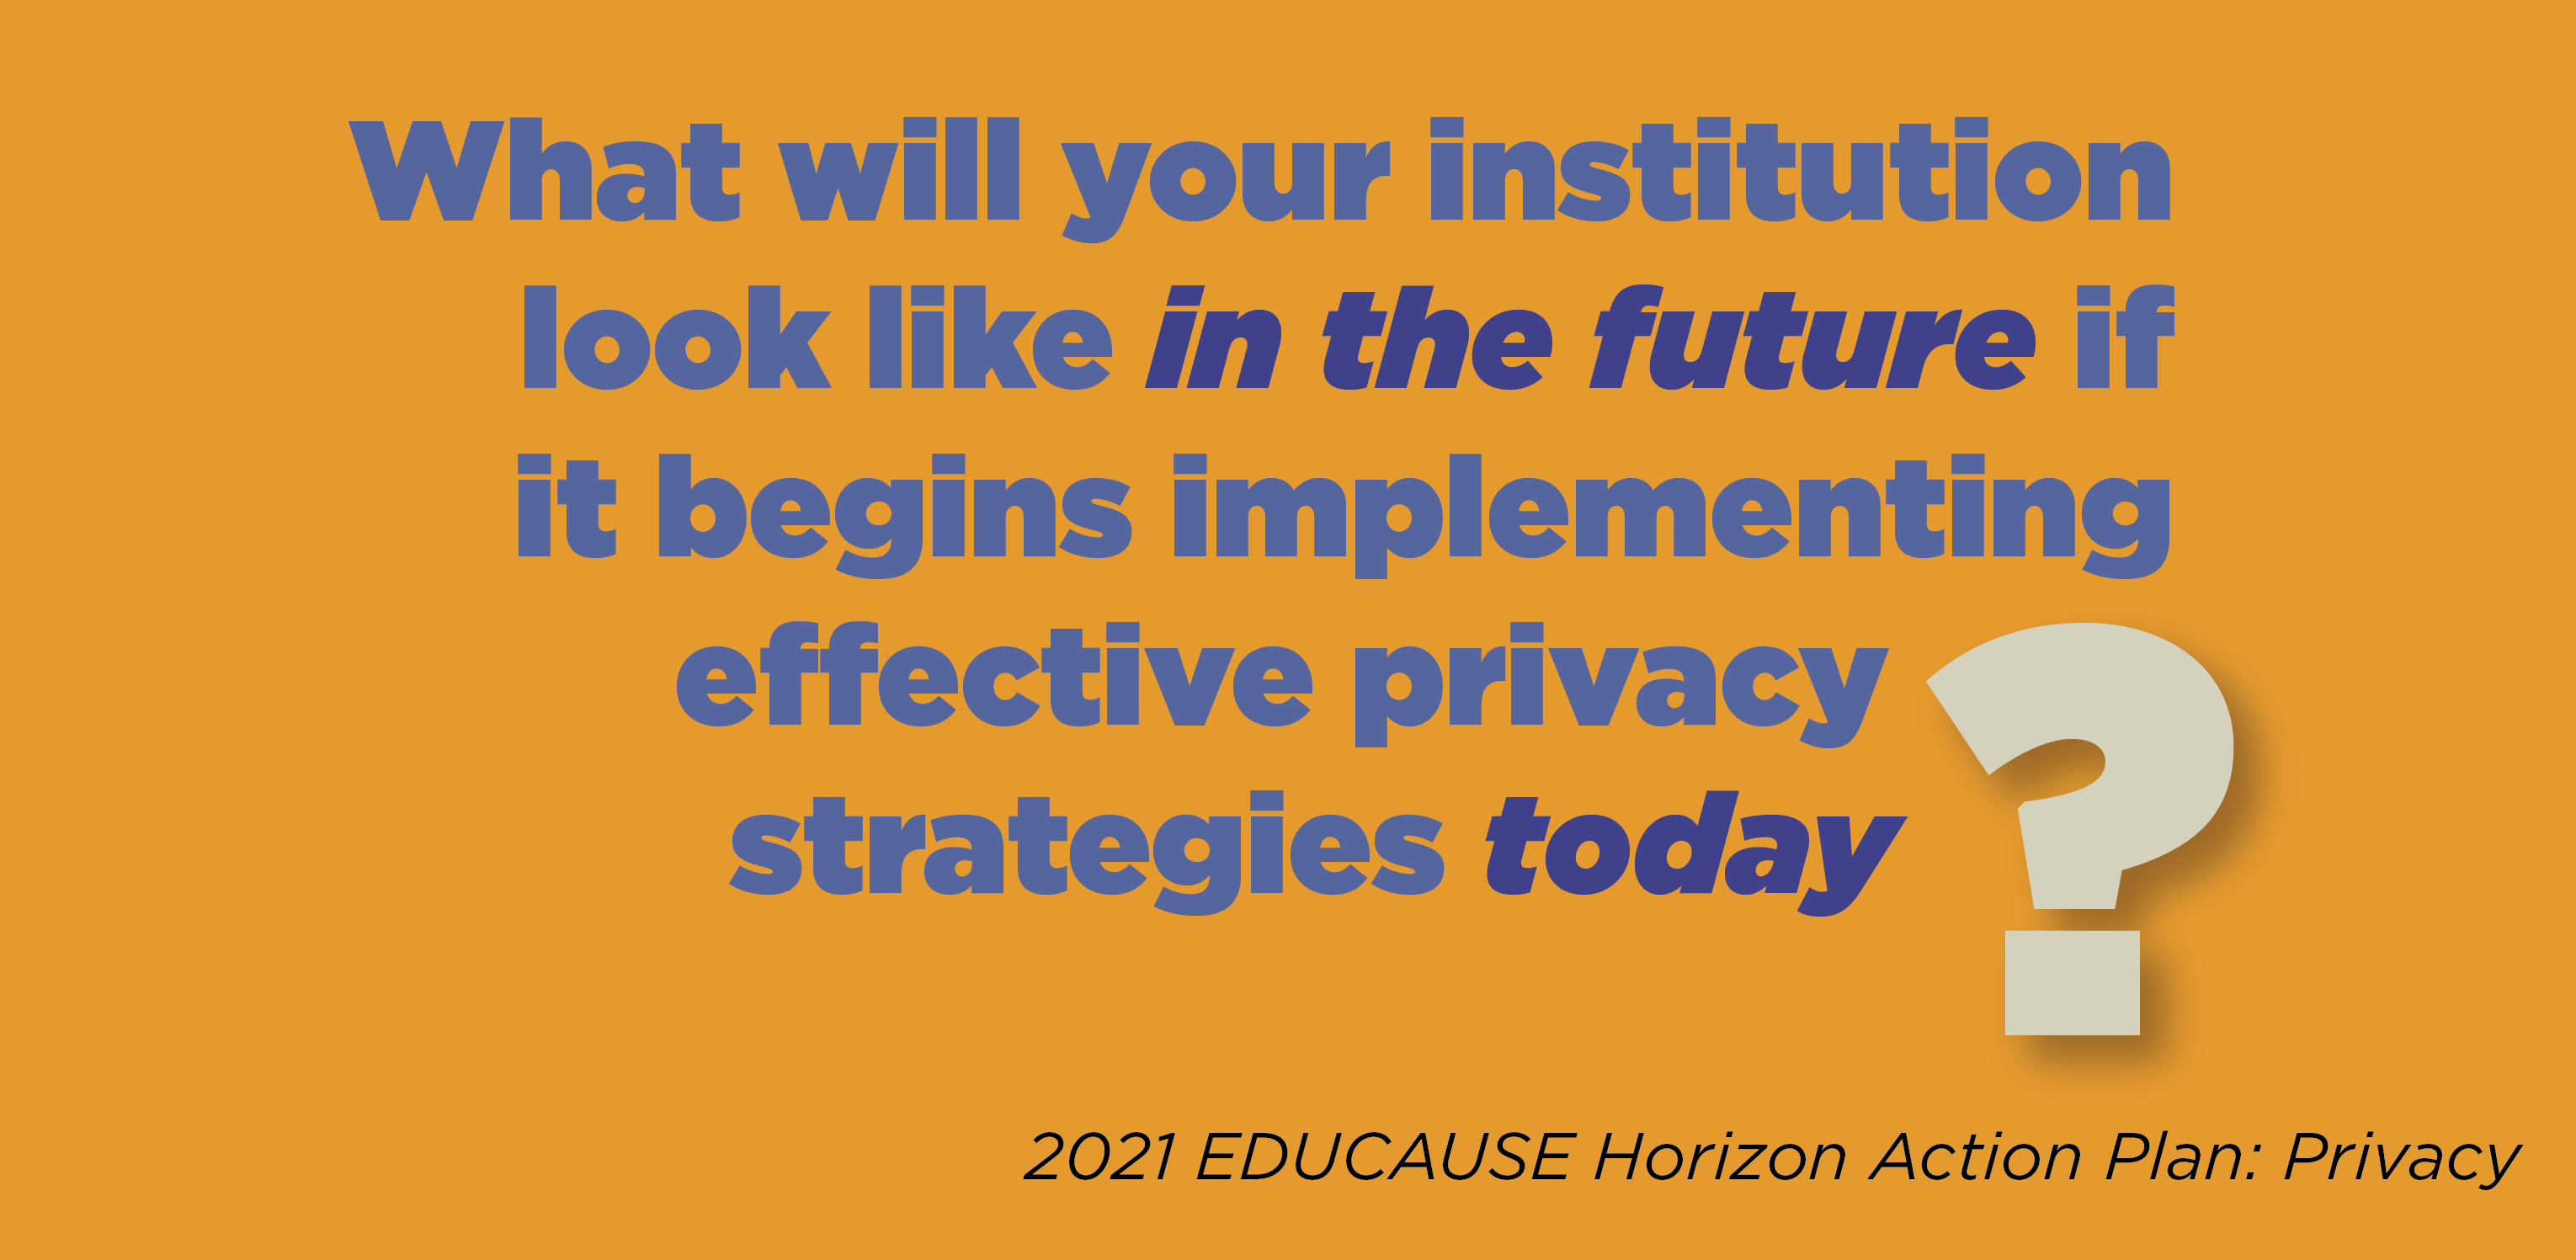 What will your institution look like in the future if it begins implementing effective privacy strategies today? 2021 EDUCAUSE Horizon Action Plan: Privacy